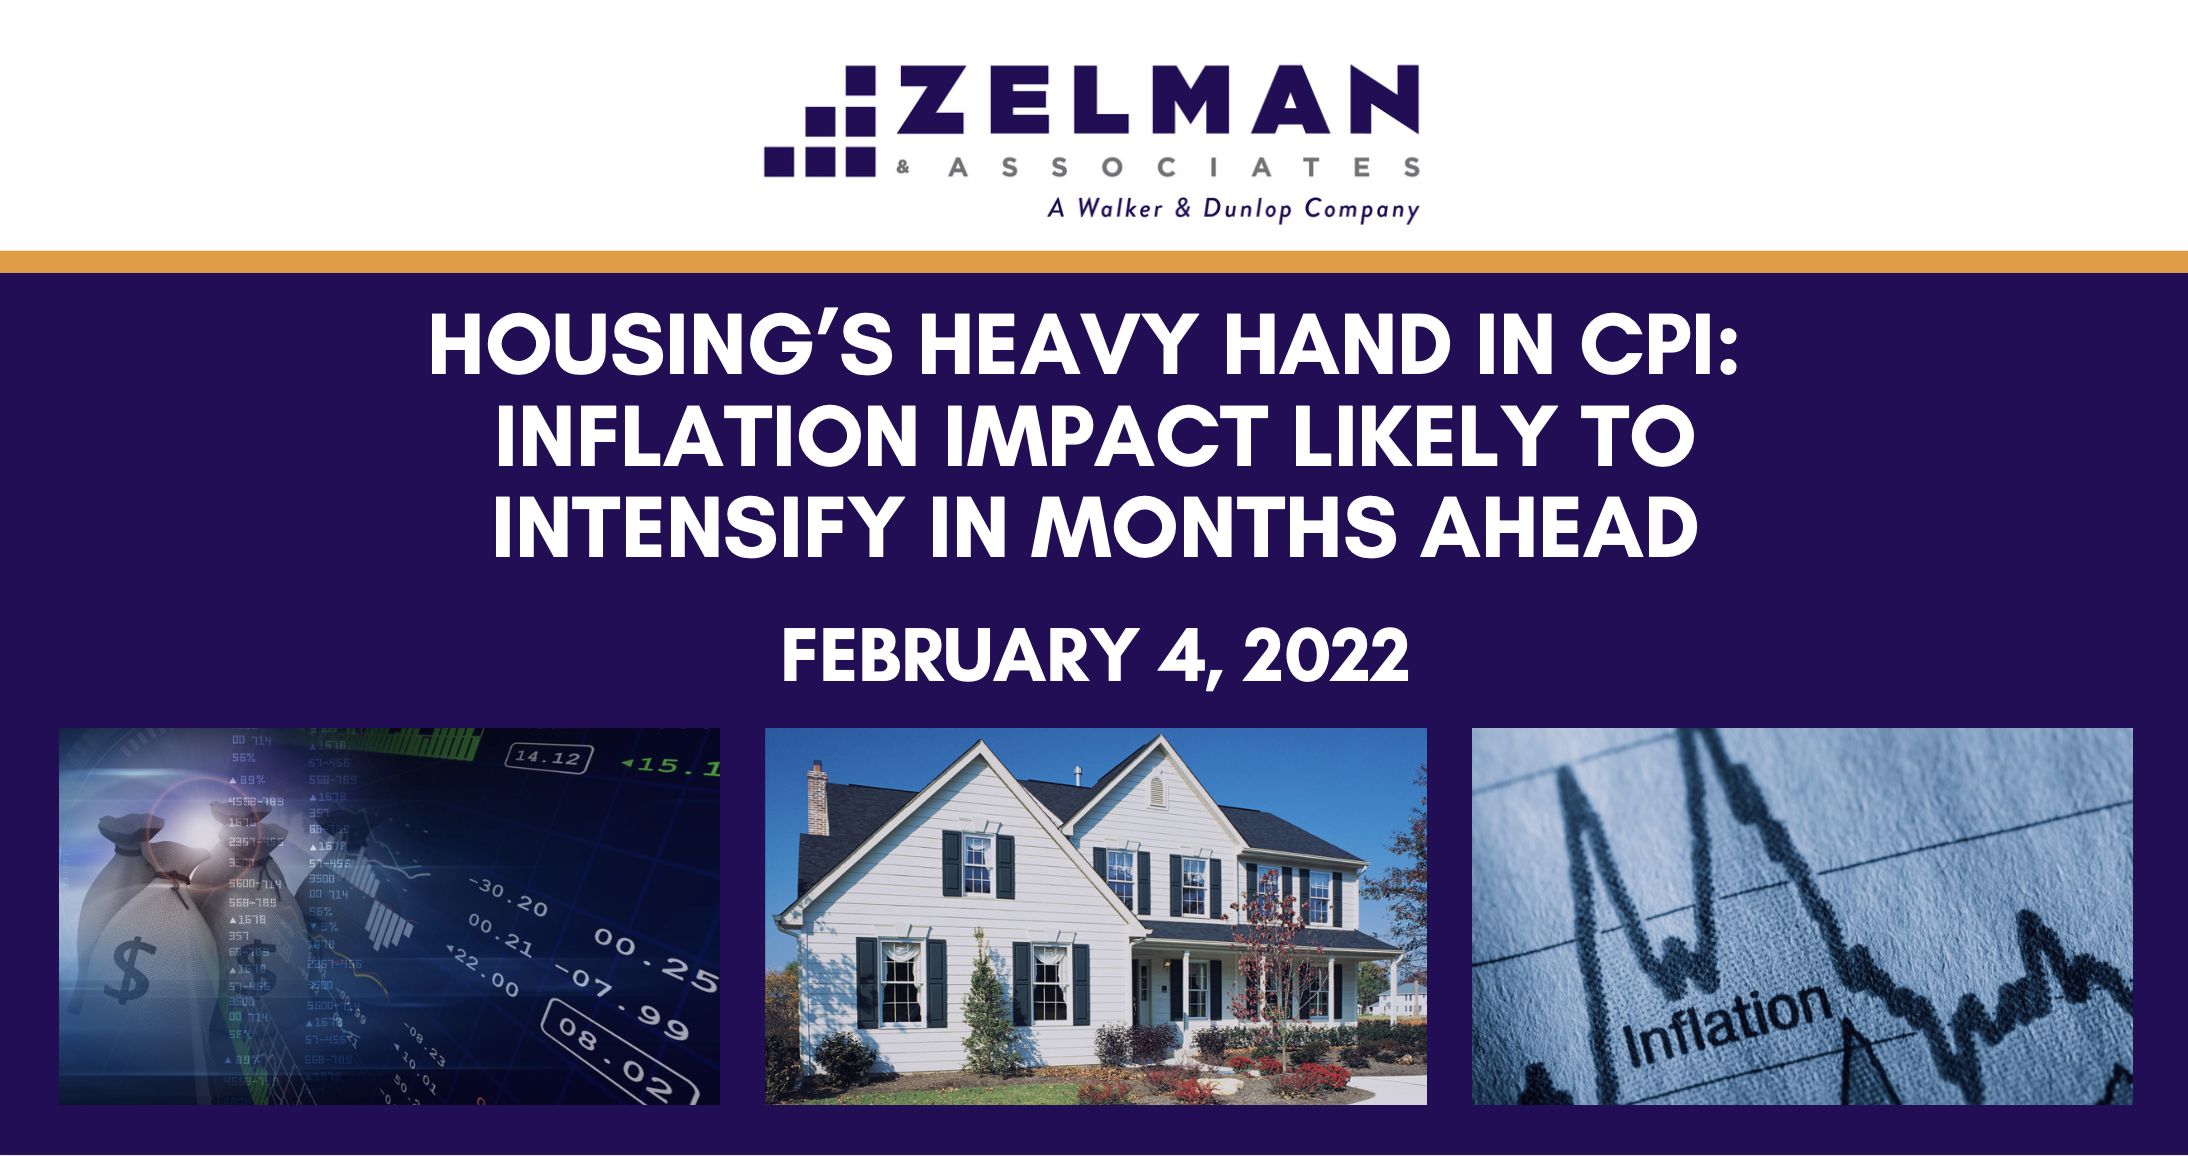 Housing’s Heavy Hand in CPI: Inflation Impact Likely to Intensify in Months Ahead